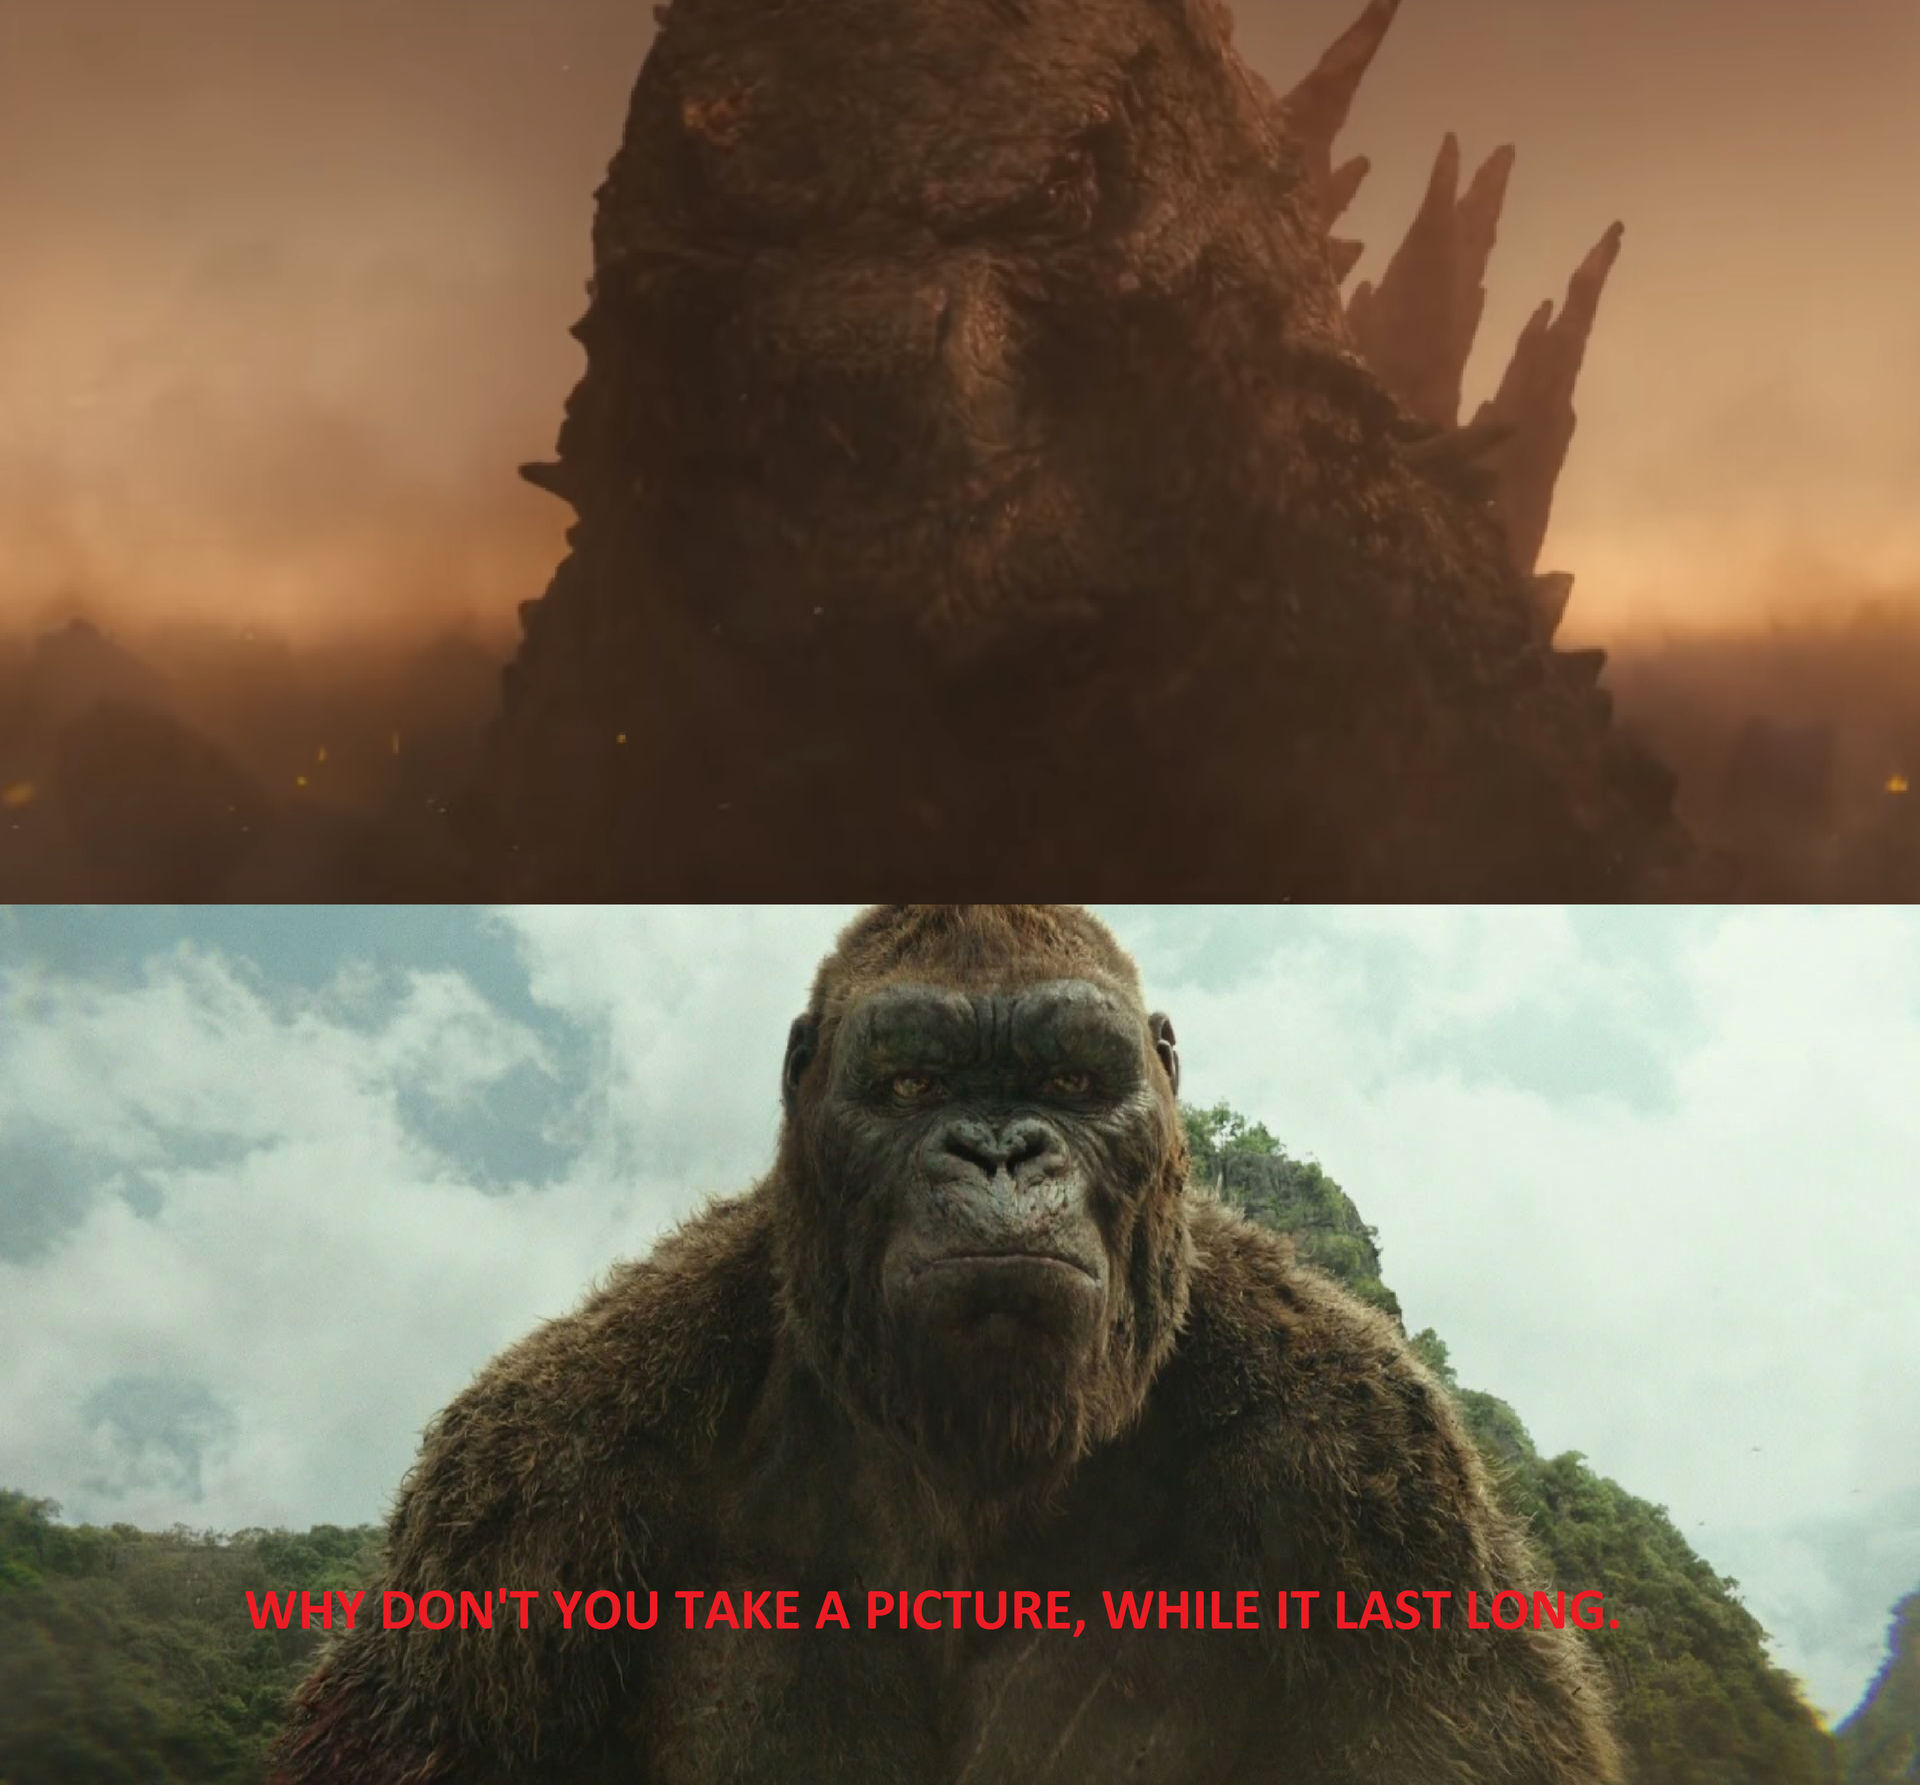 Godzilla and Kong Angry Look by MnstrFrc on DeviantArt